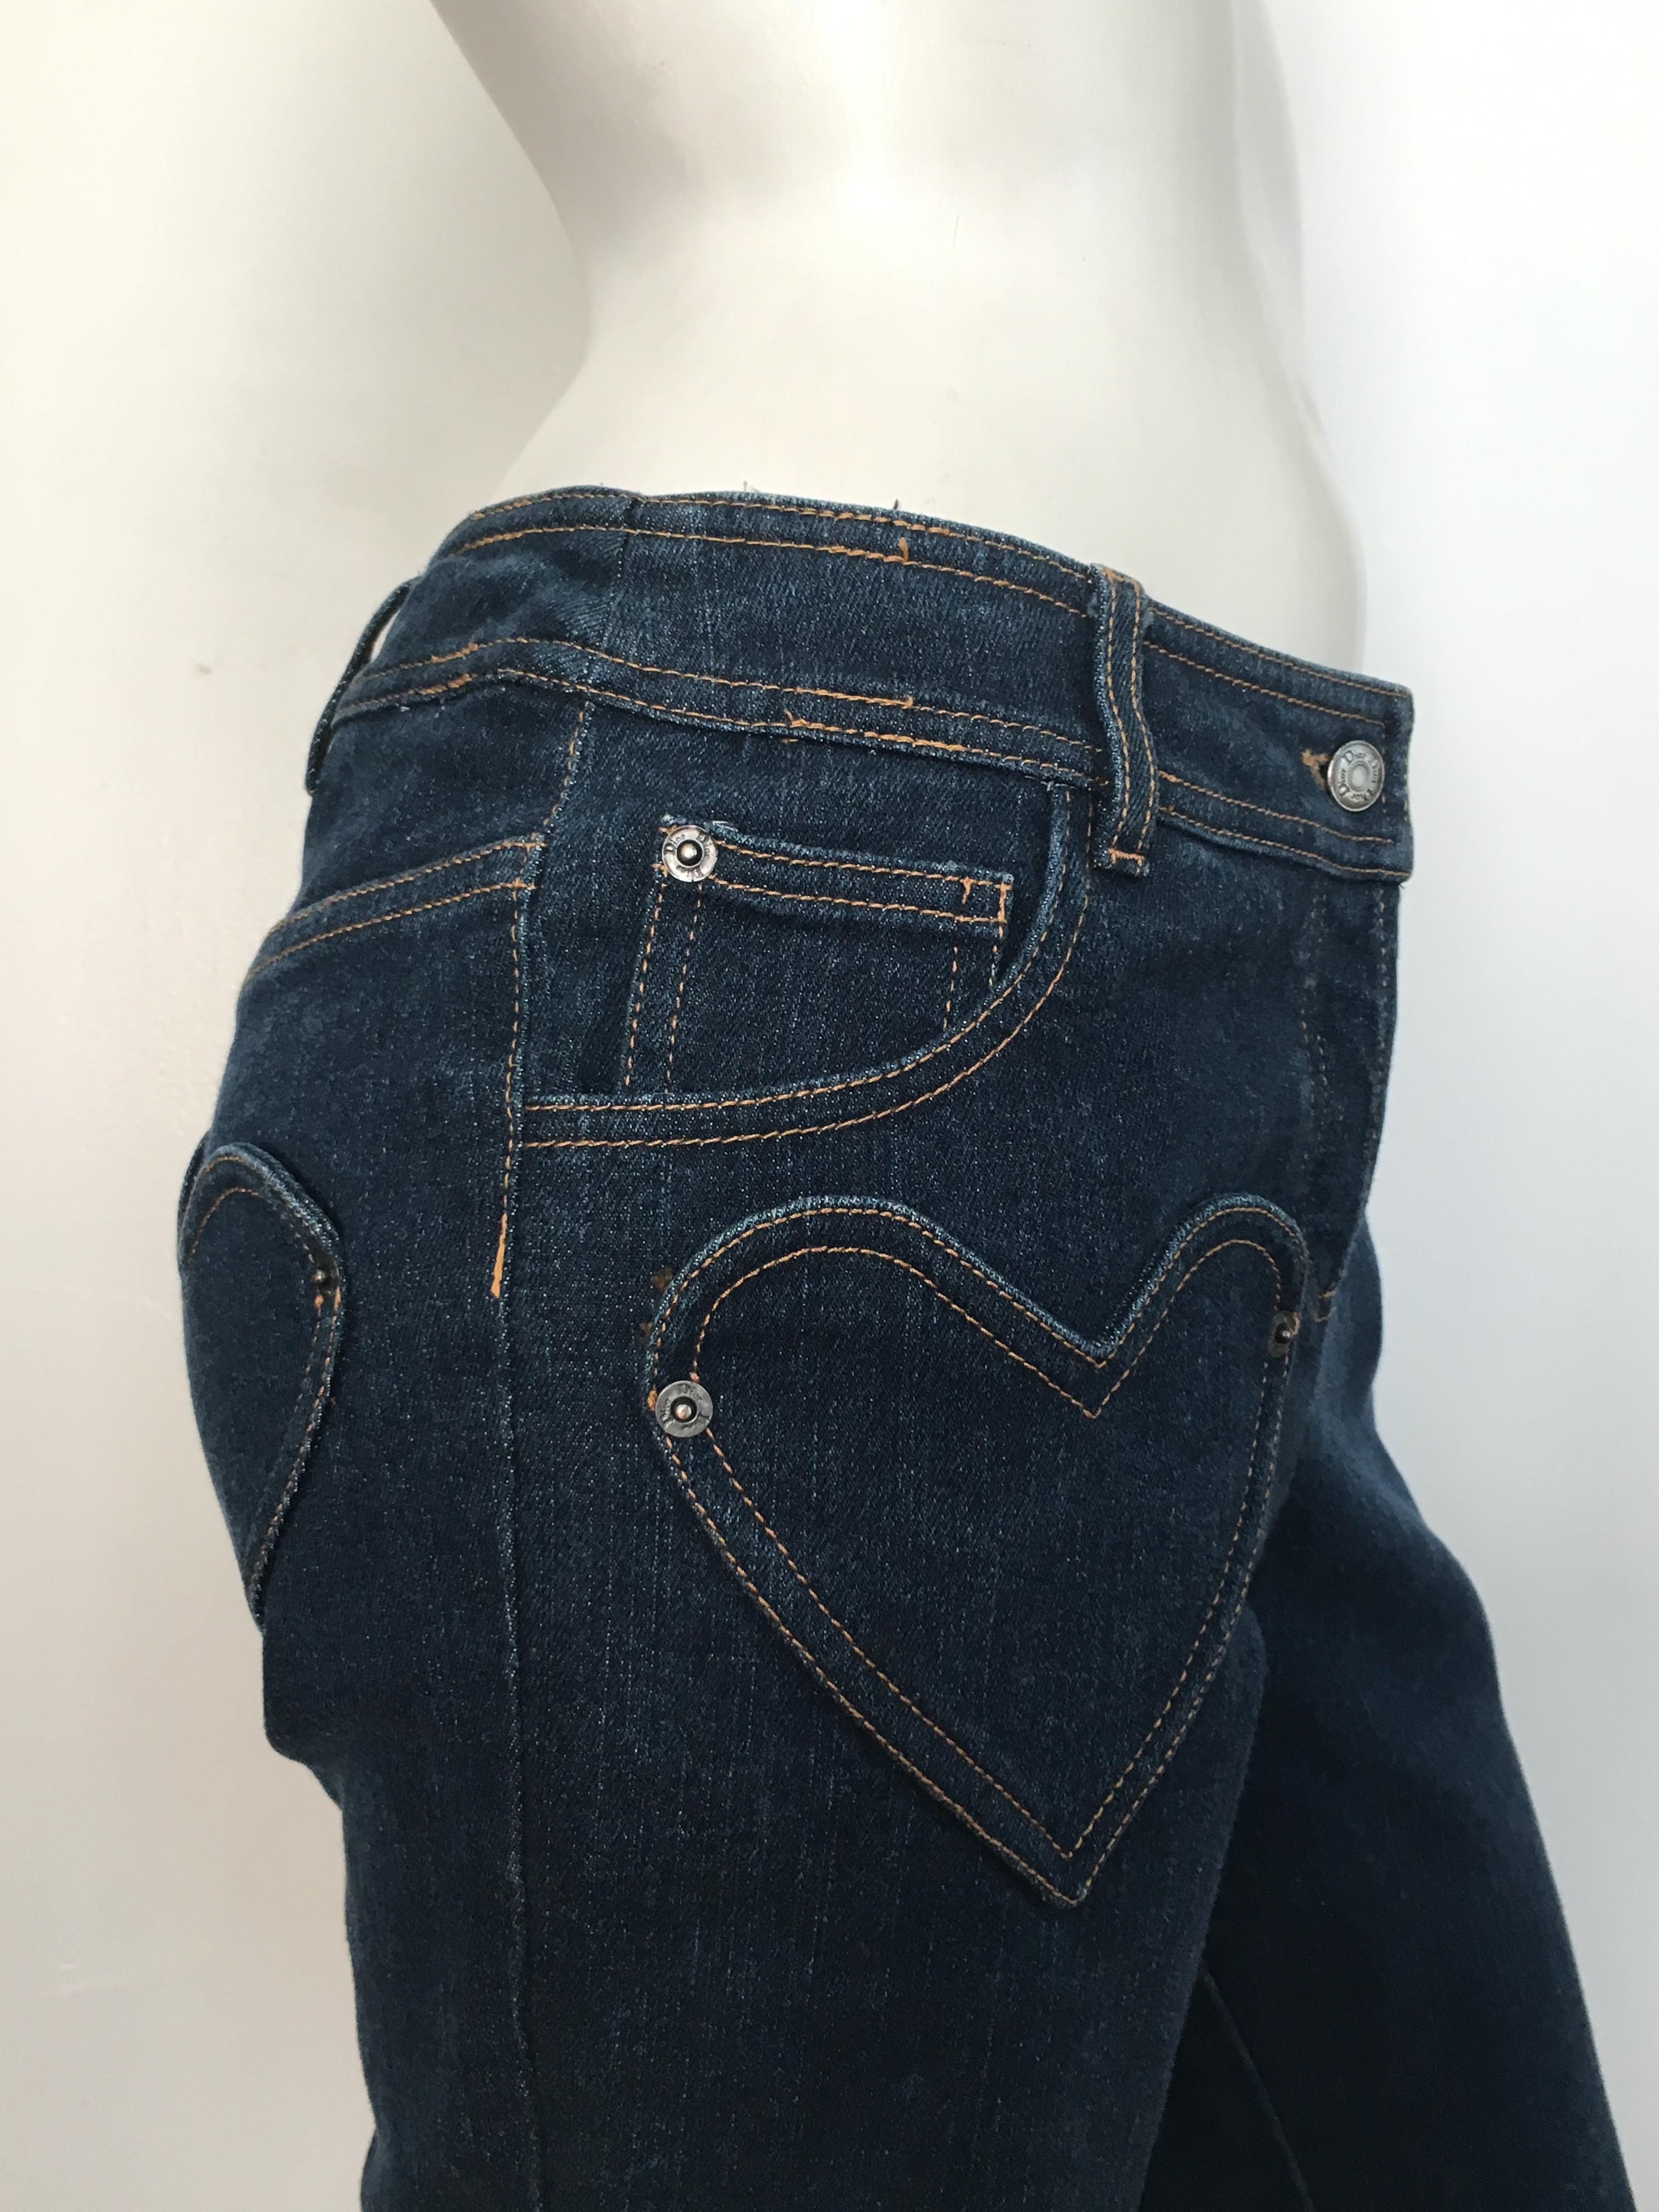 Dior Denim Button Up Jeans with Heart Shape Pockets Size 6.  1